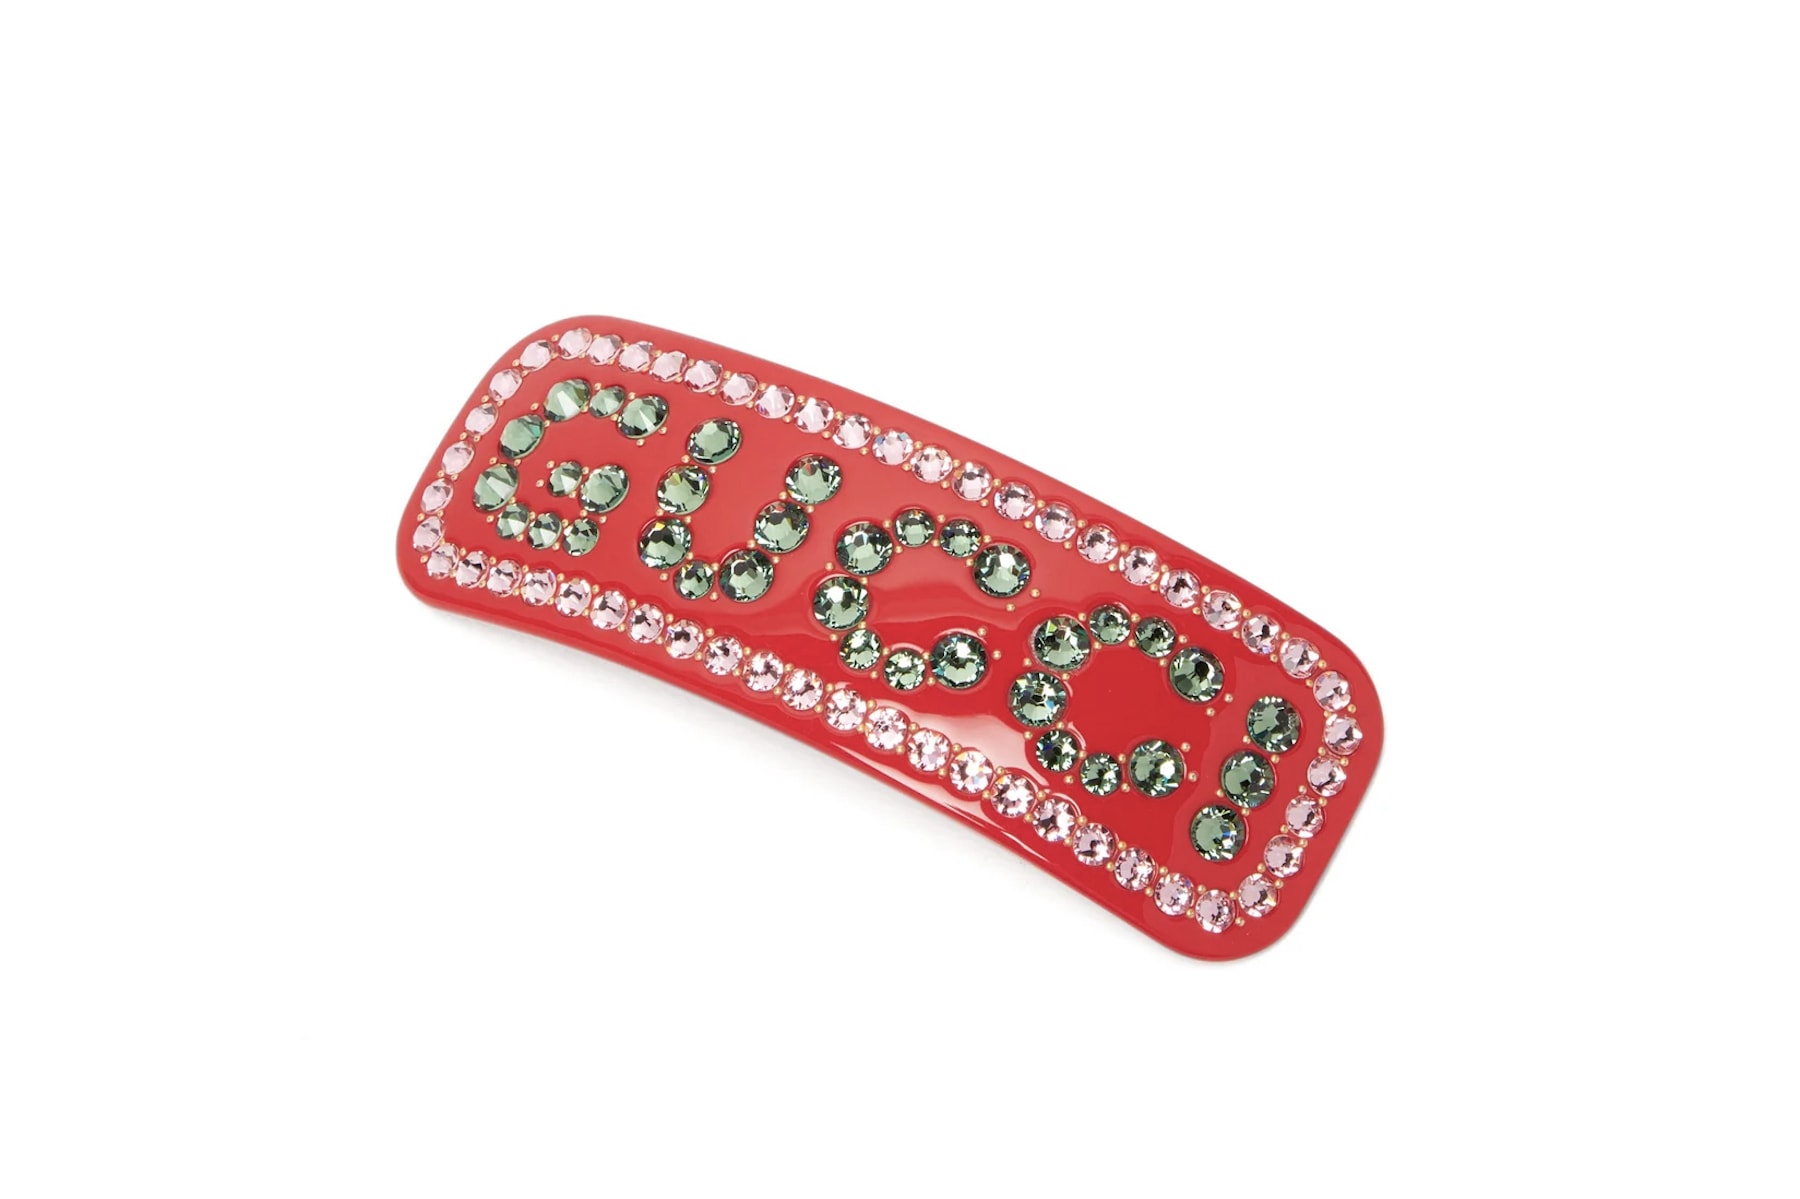 Gucci Rhinestone Logo Hairclip in Red Accessory Pin Statement Hair Trend Fashion 